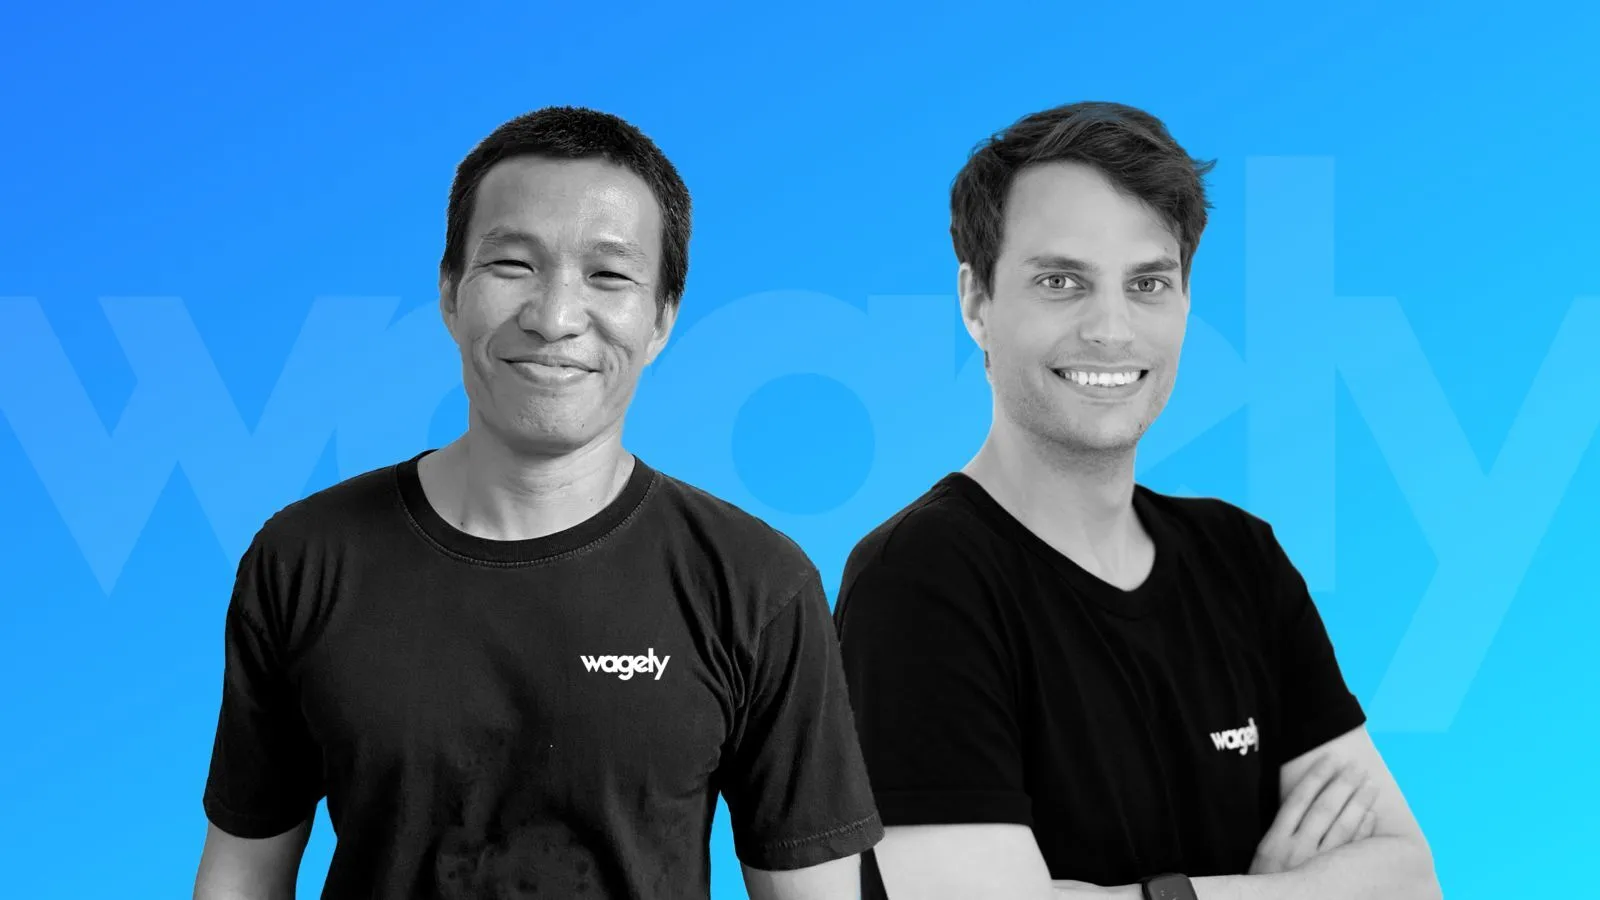 wagely-founder